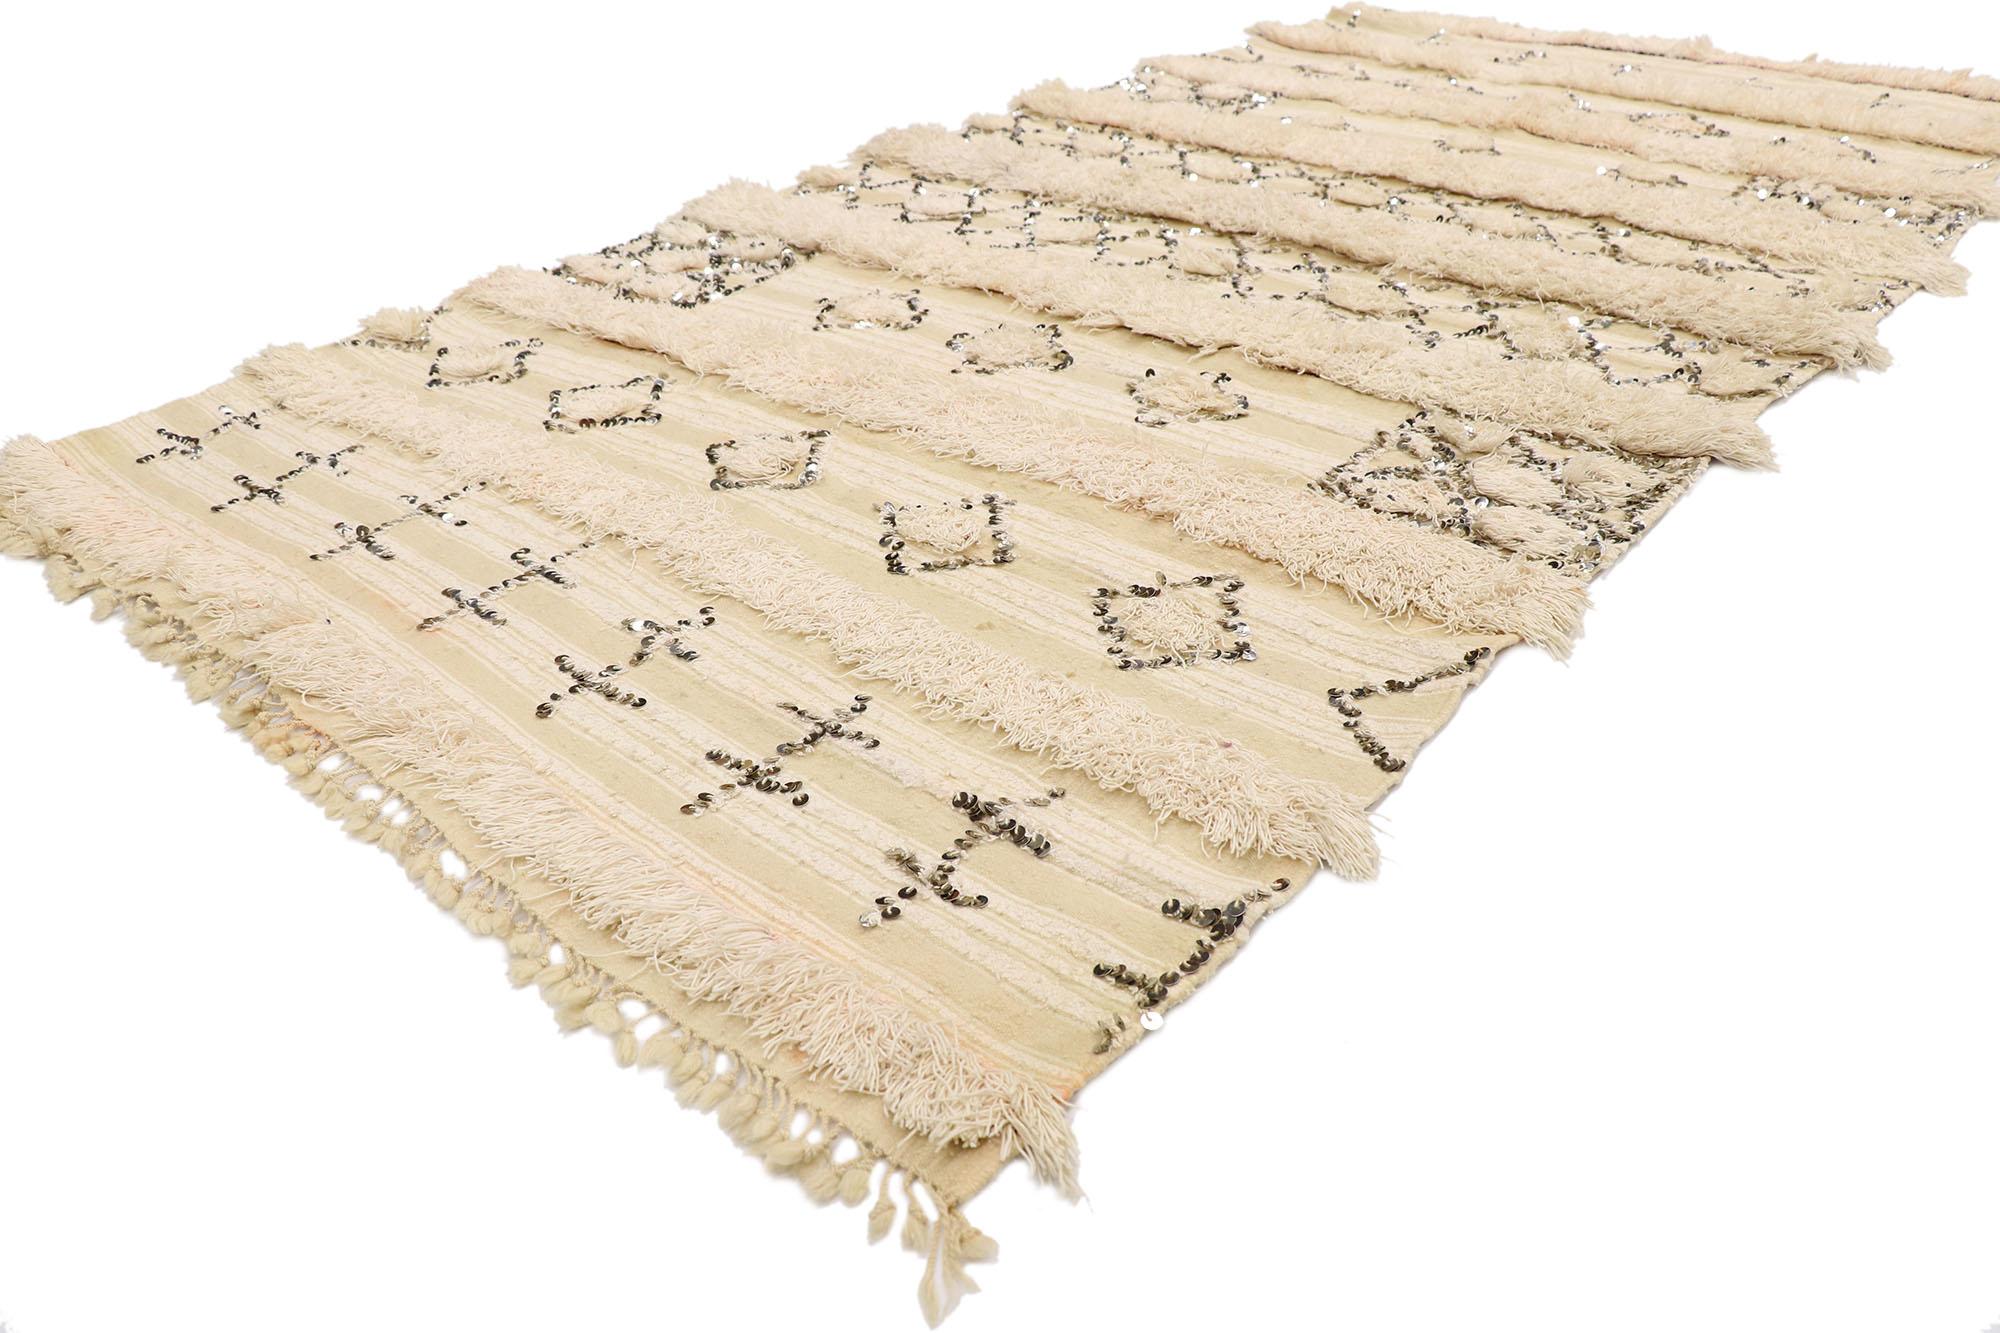 21546 Vintage Moroccan Wedding Blanket, Berber Handira 03'10 x 07'07. This handwoven wool vintage Moroccan Wedding Blanket also known as a Berber Tamizart Handira features rows of fluffy fringe composed of diamonds, cross motifs, and lozenge lattice